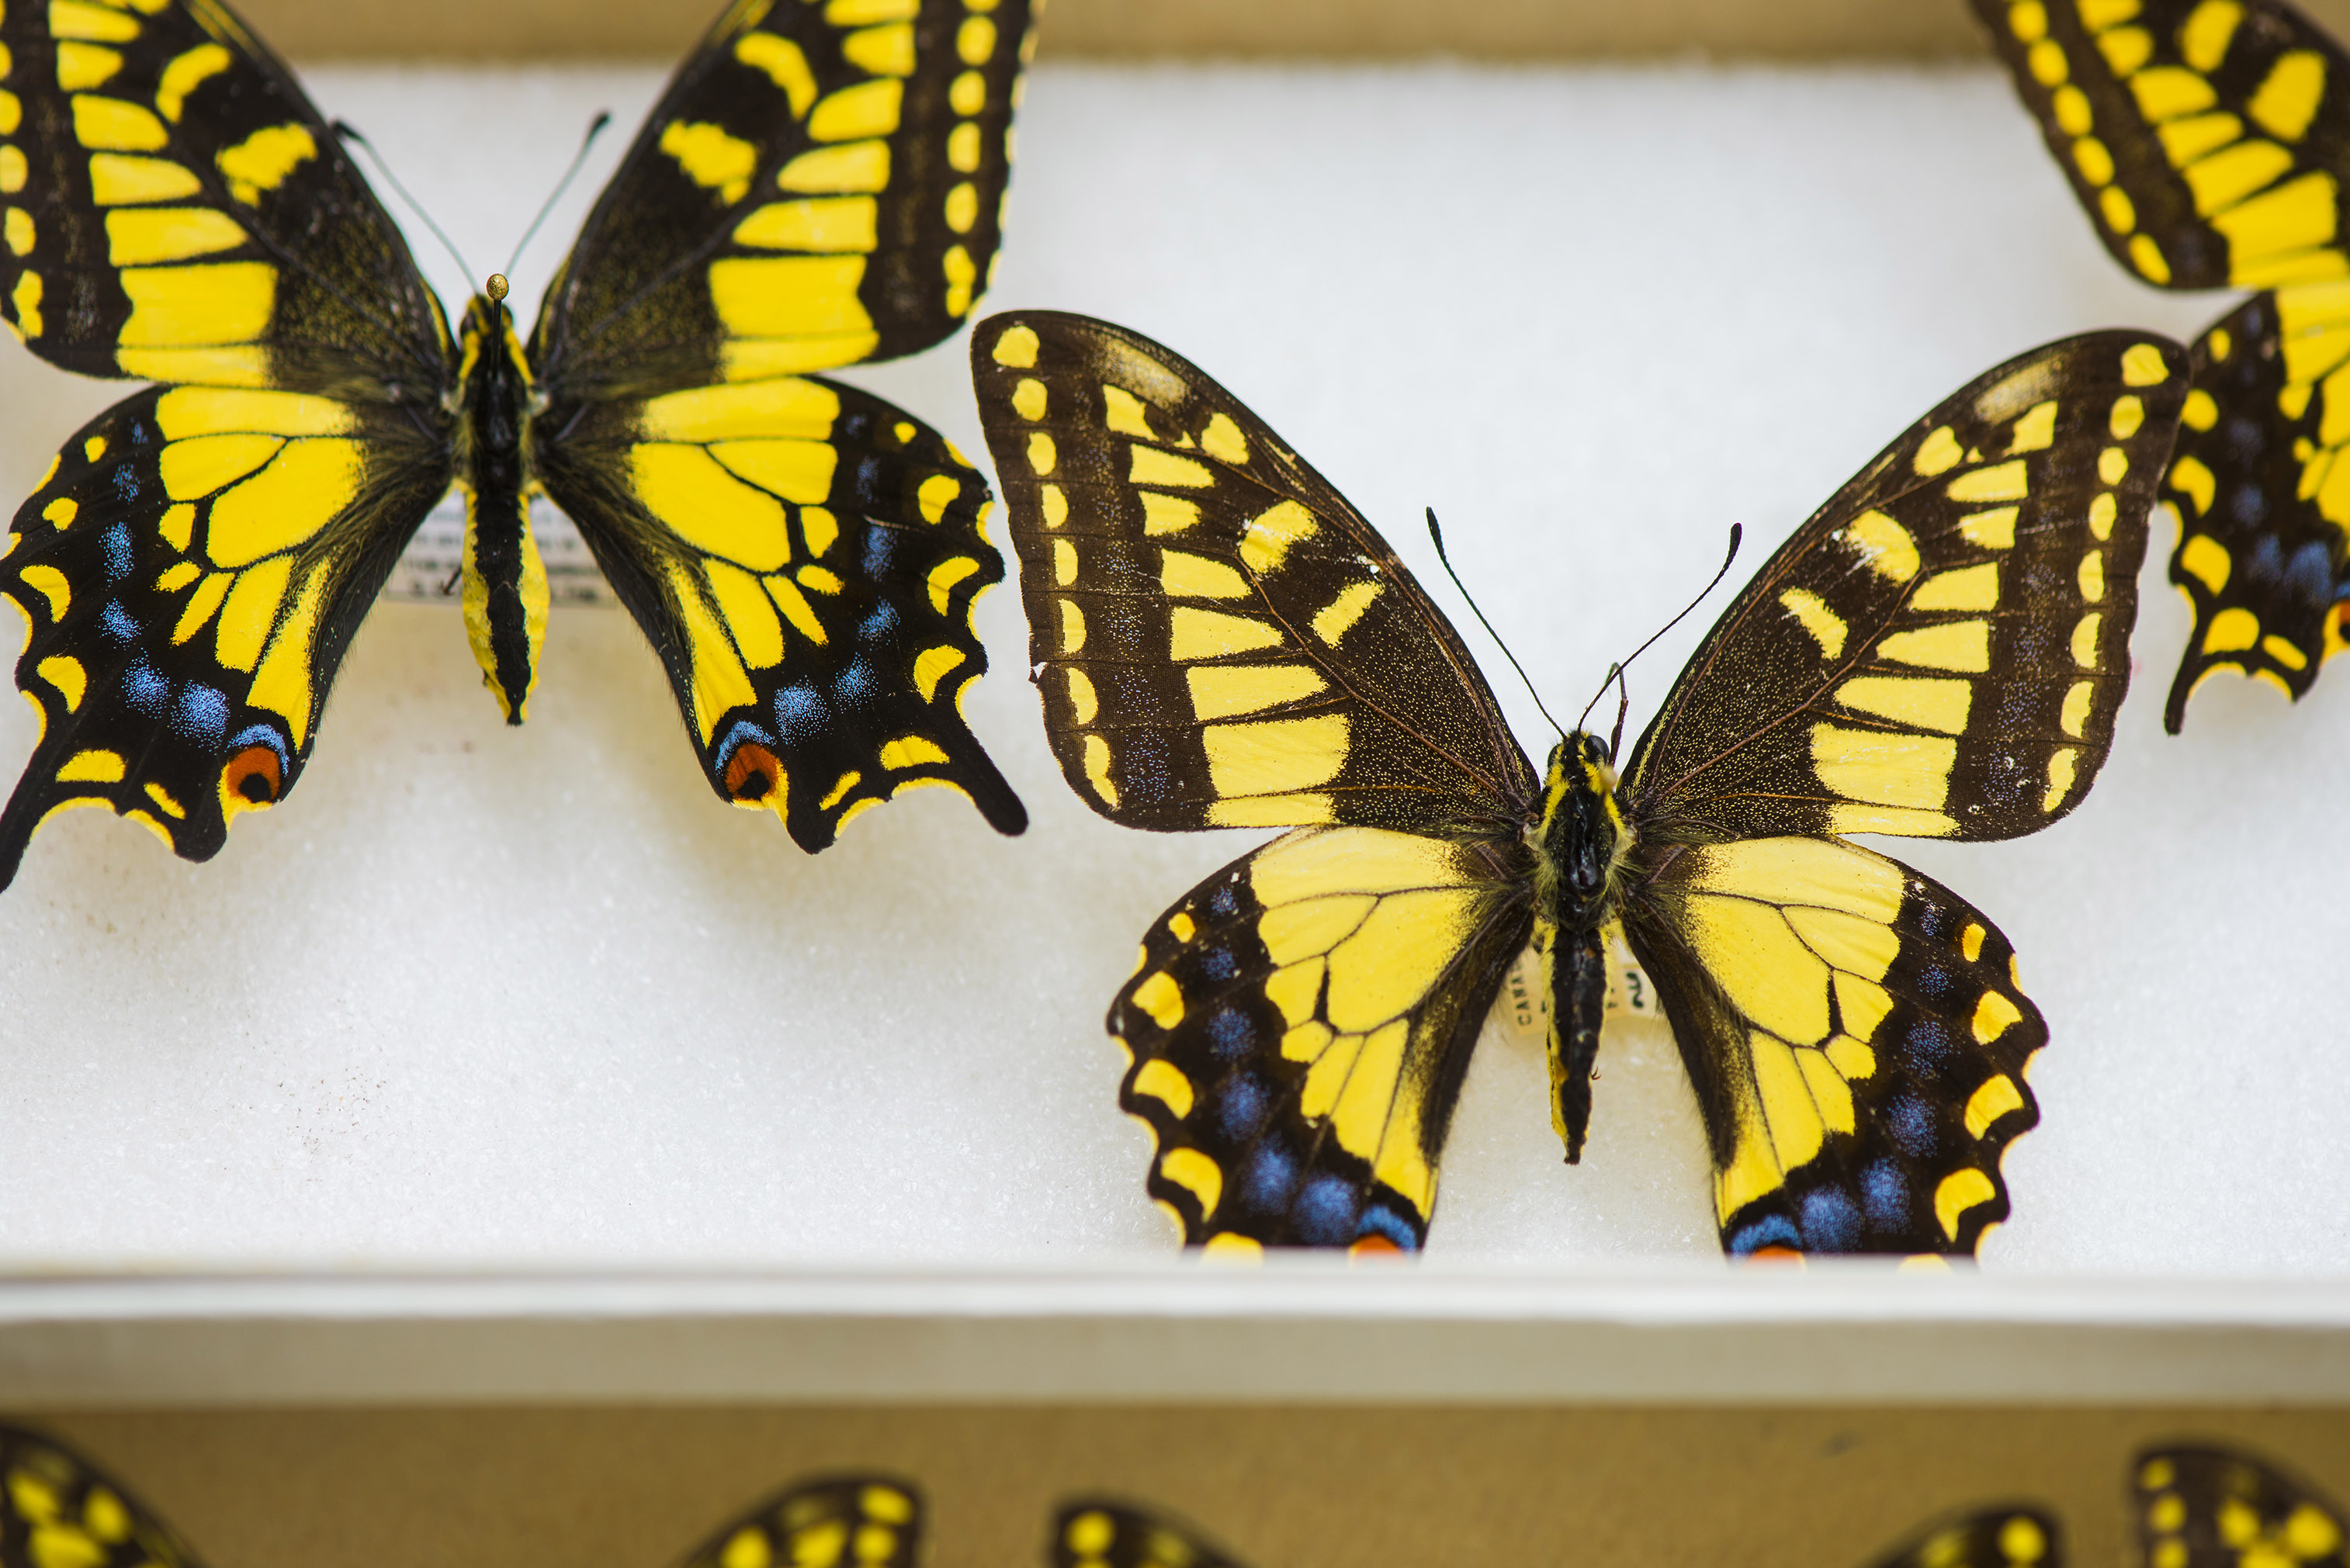 Swallowtail butterfly specimens pinned on a white board.